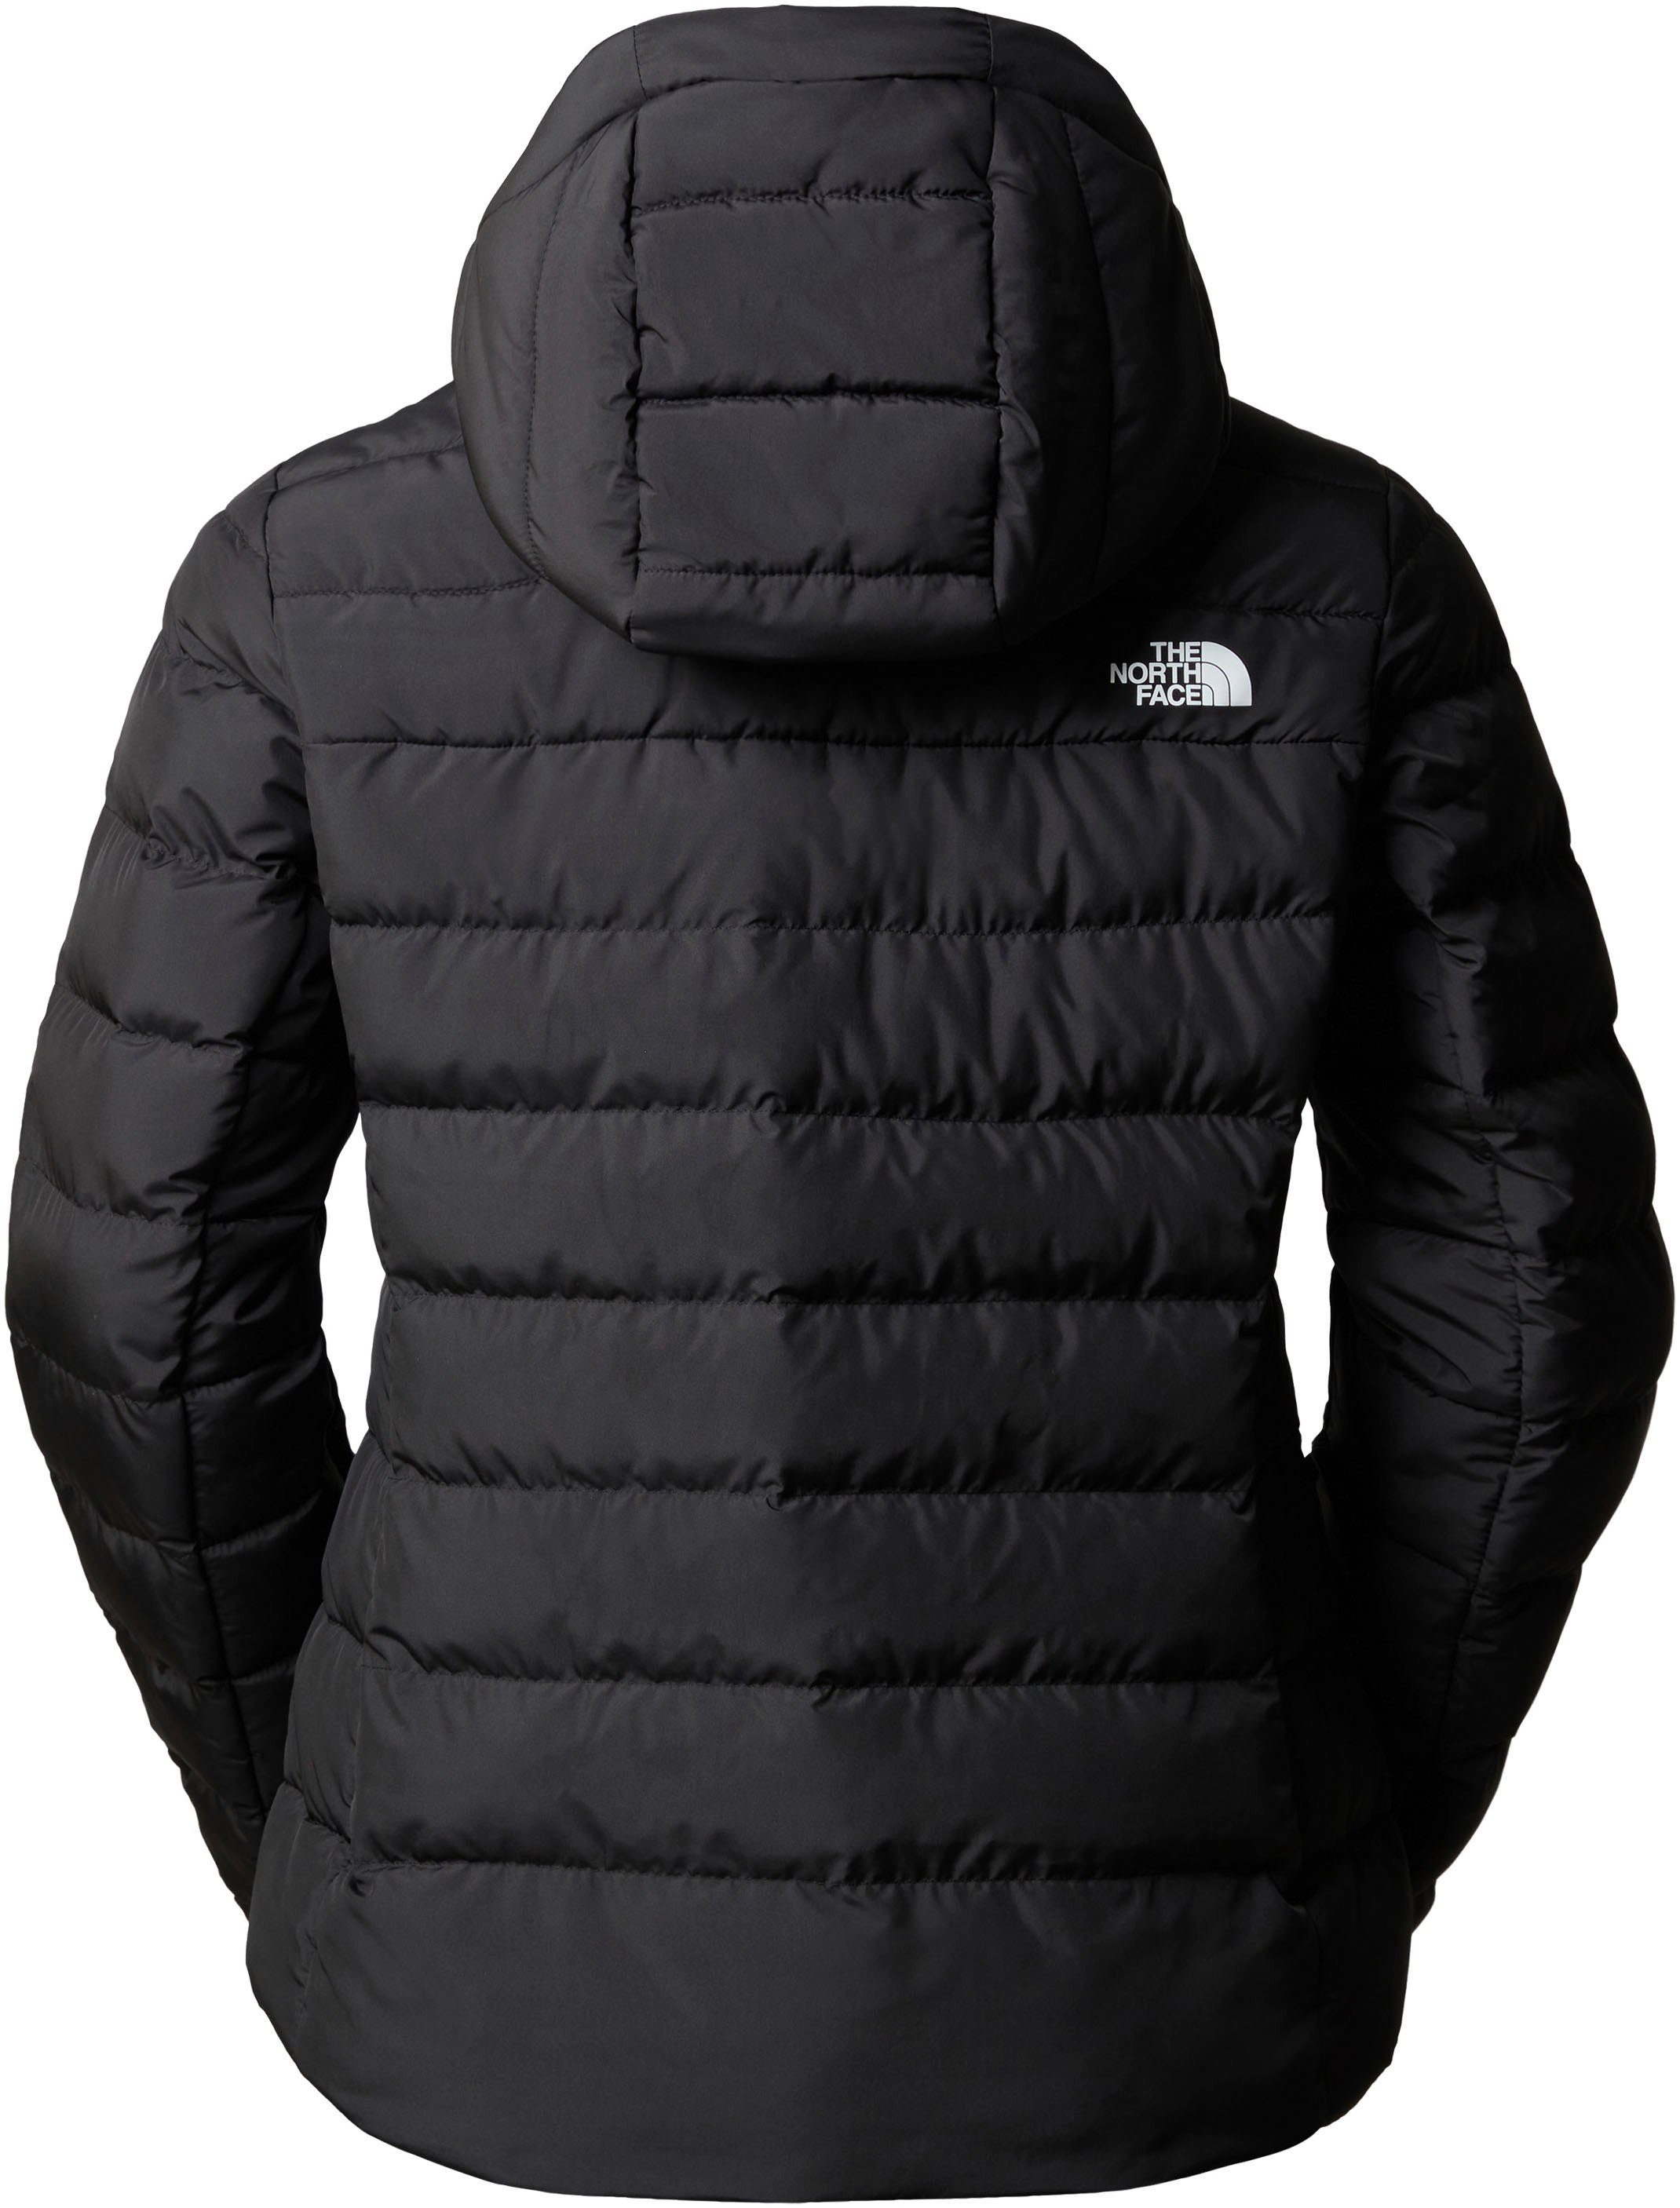 The North Face HOODIE mit Logodruck ACONCAGUA 3 Funktionsjacke